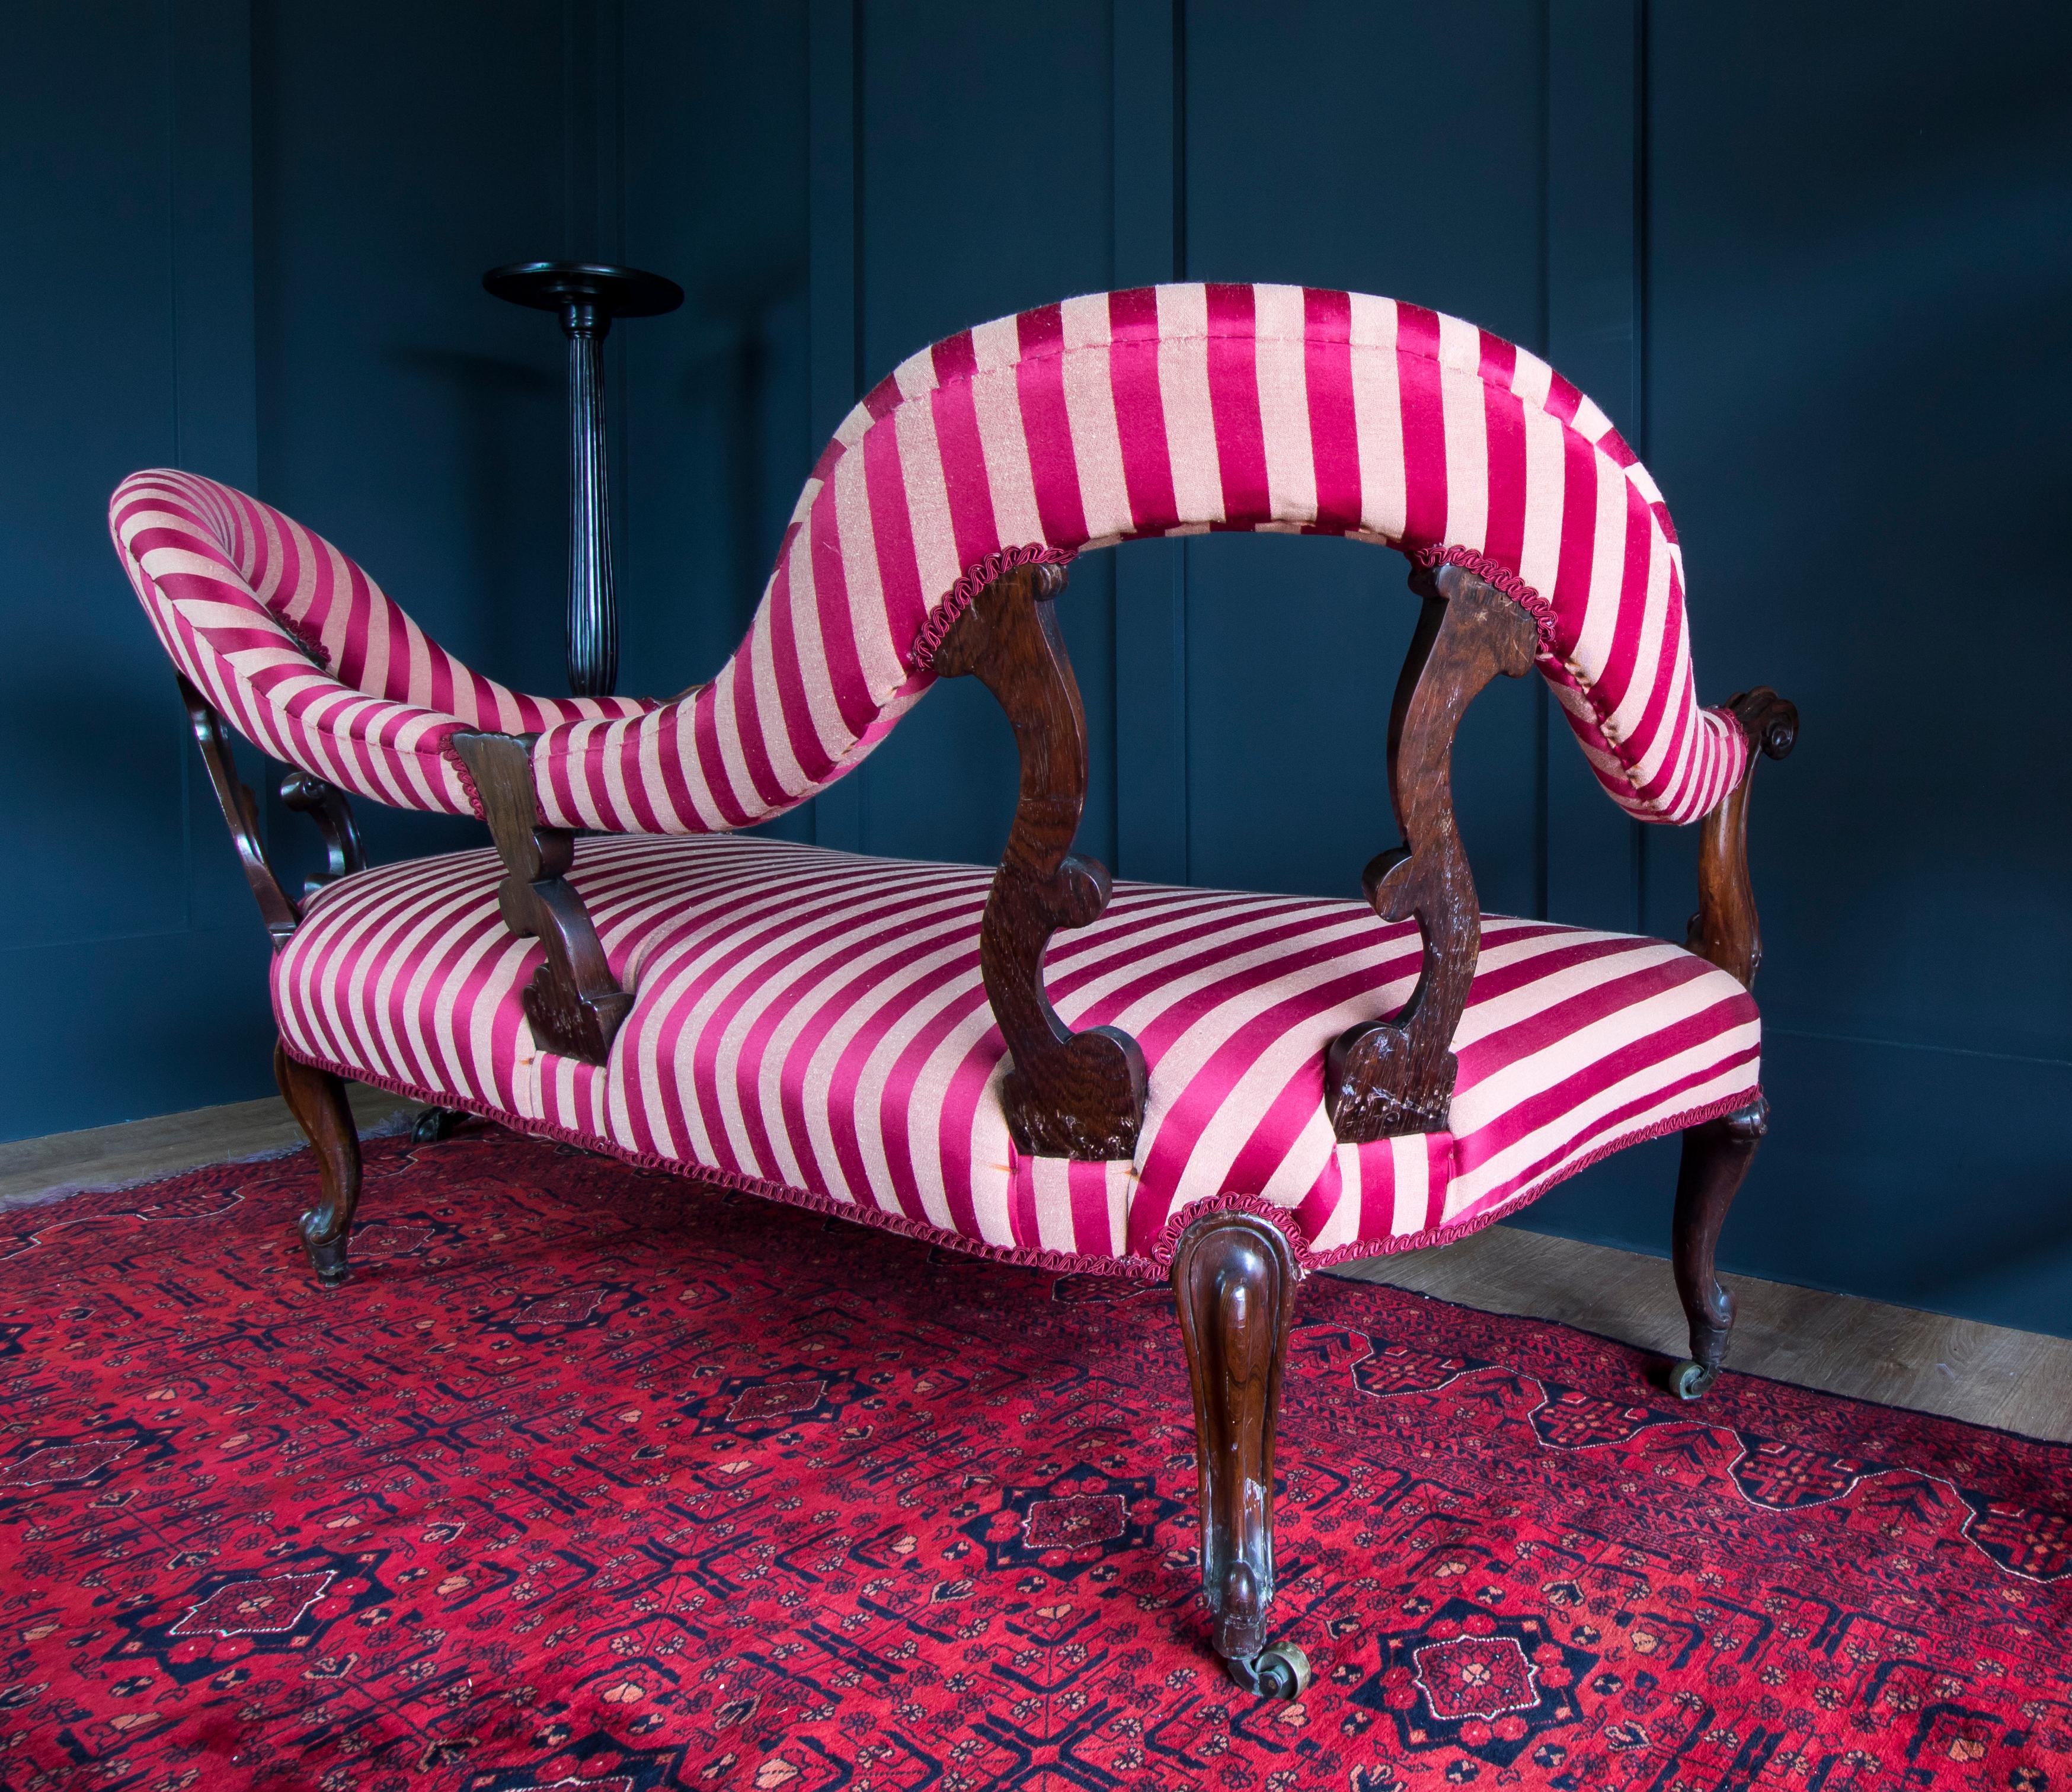 Mid-19th Century Victorian Rosewood Parlour Sofa in Red Satin Stripes